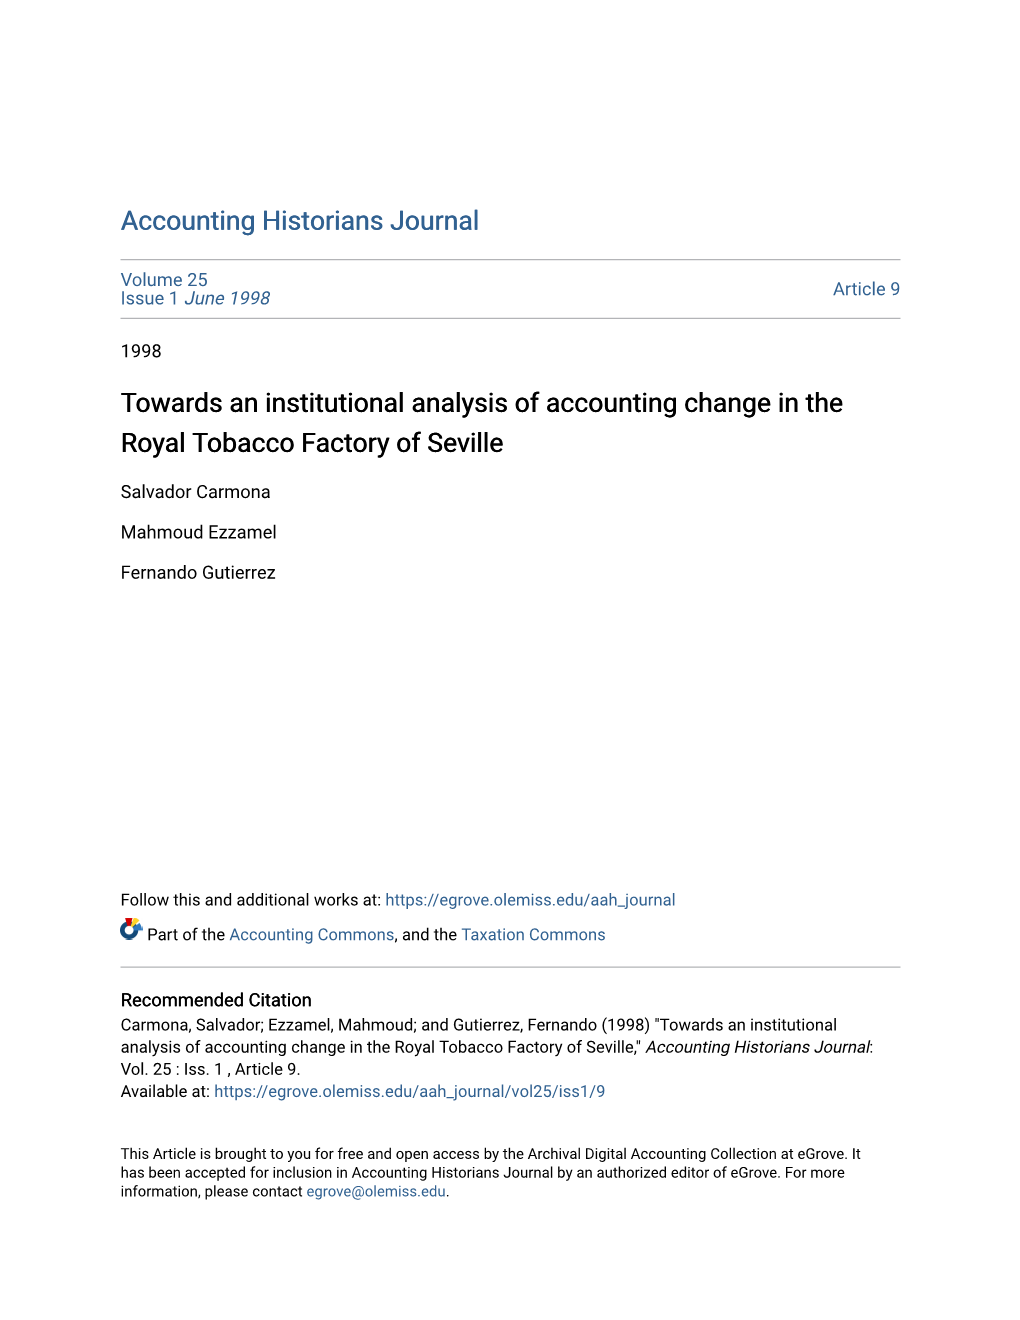 Towards an Institutional Analysis of Accounting Change in the Royal Tobacco Factory of Seville